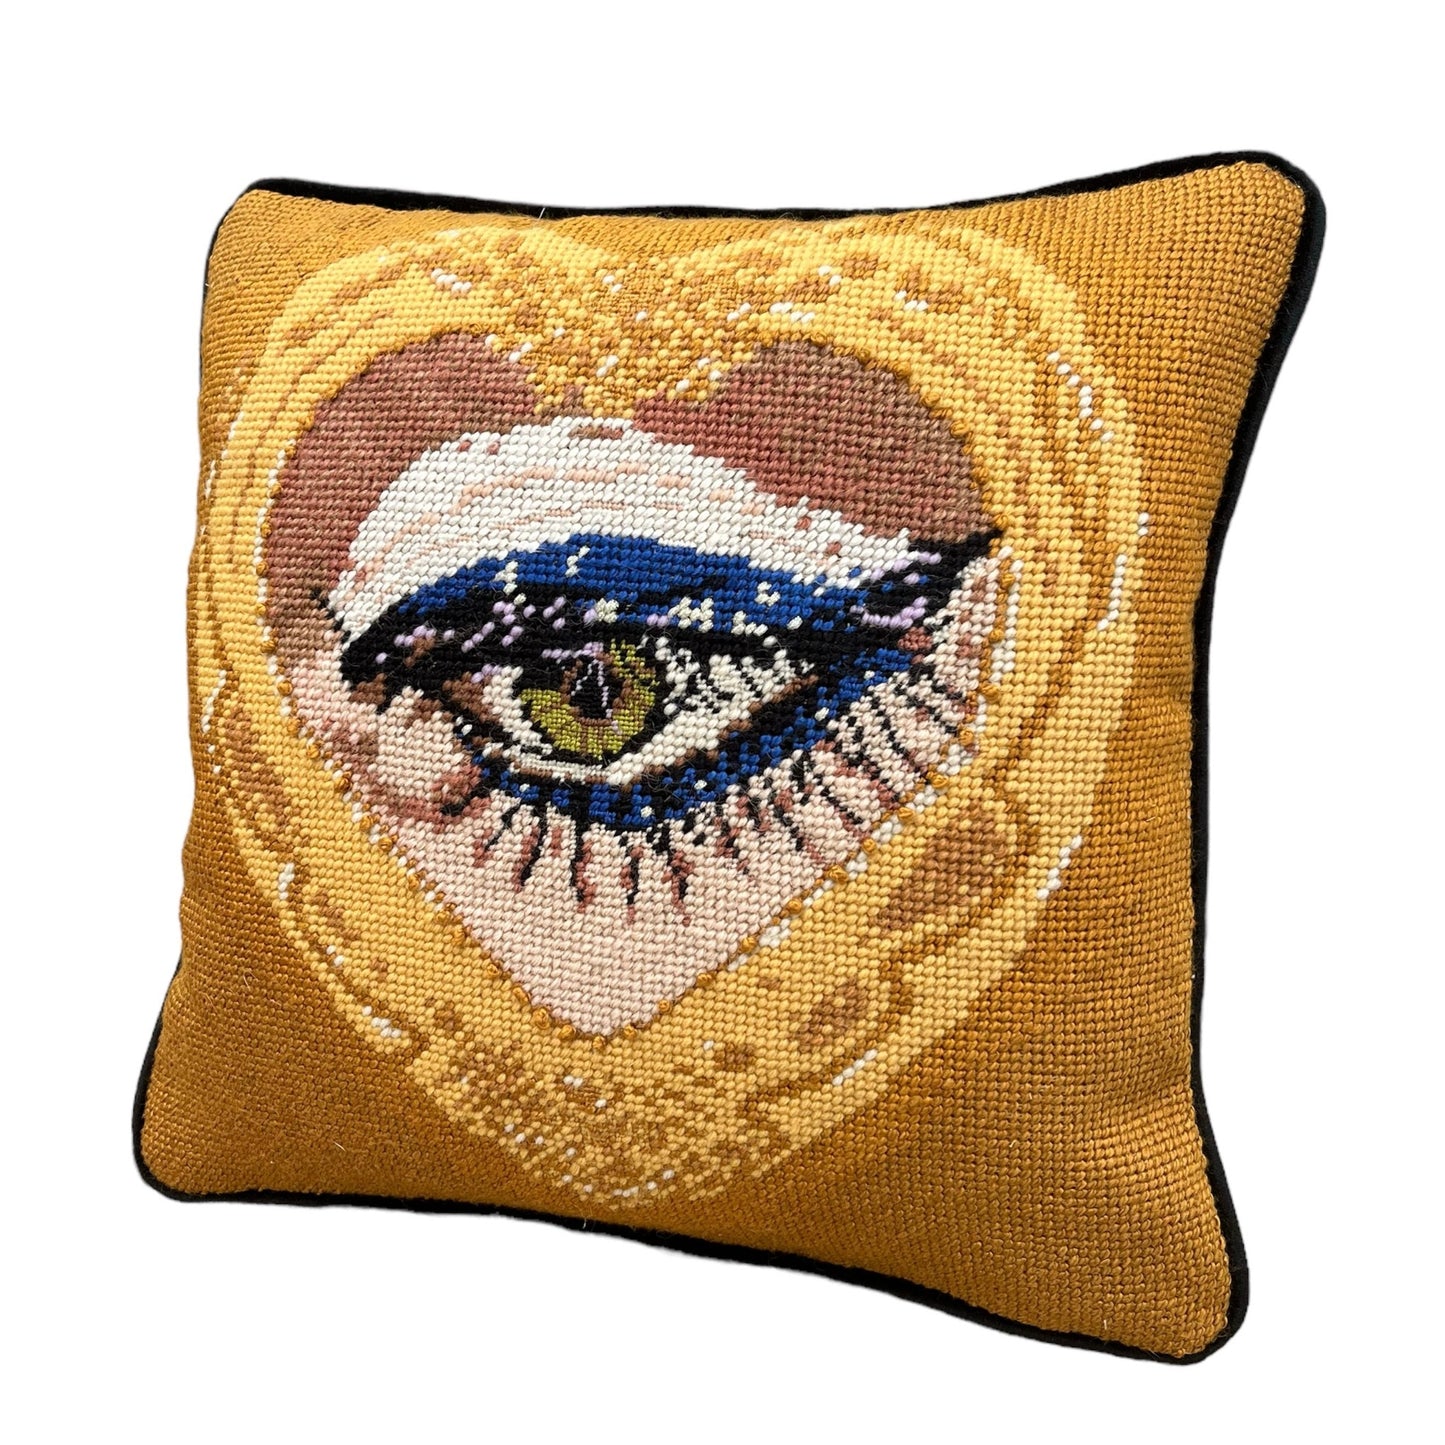 sultry green eye is framed in gold heart, hand-embroidered wool & silk pillow